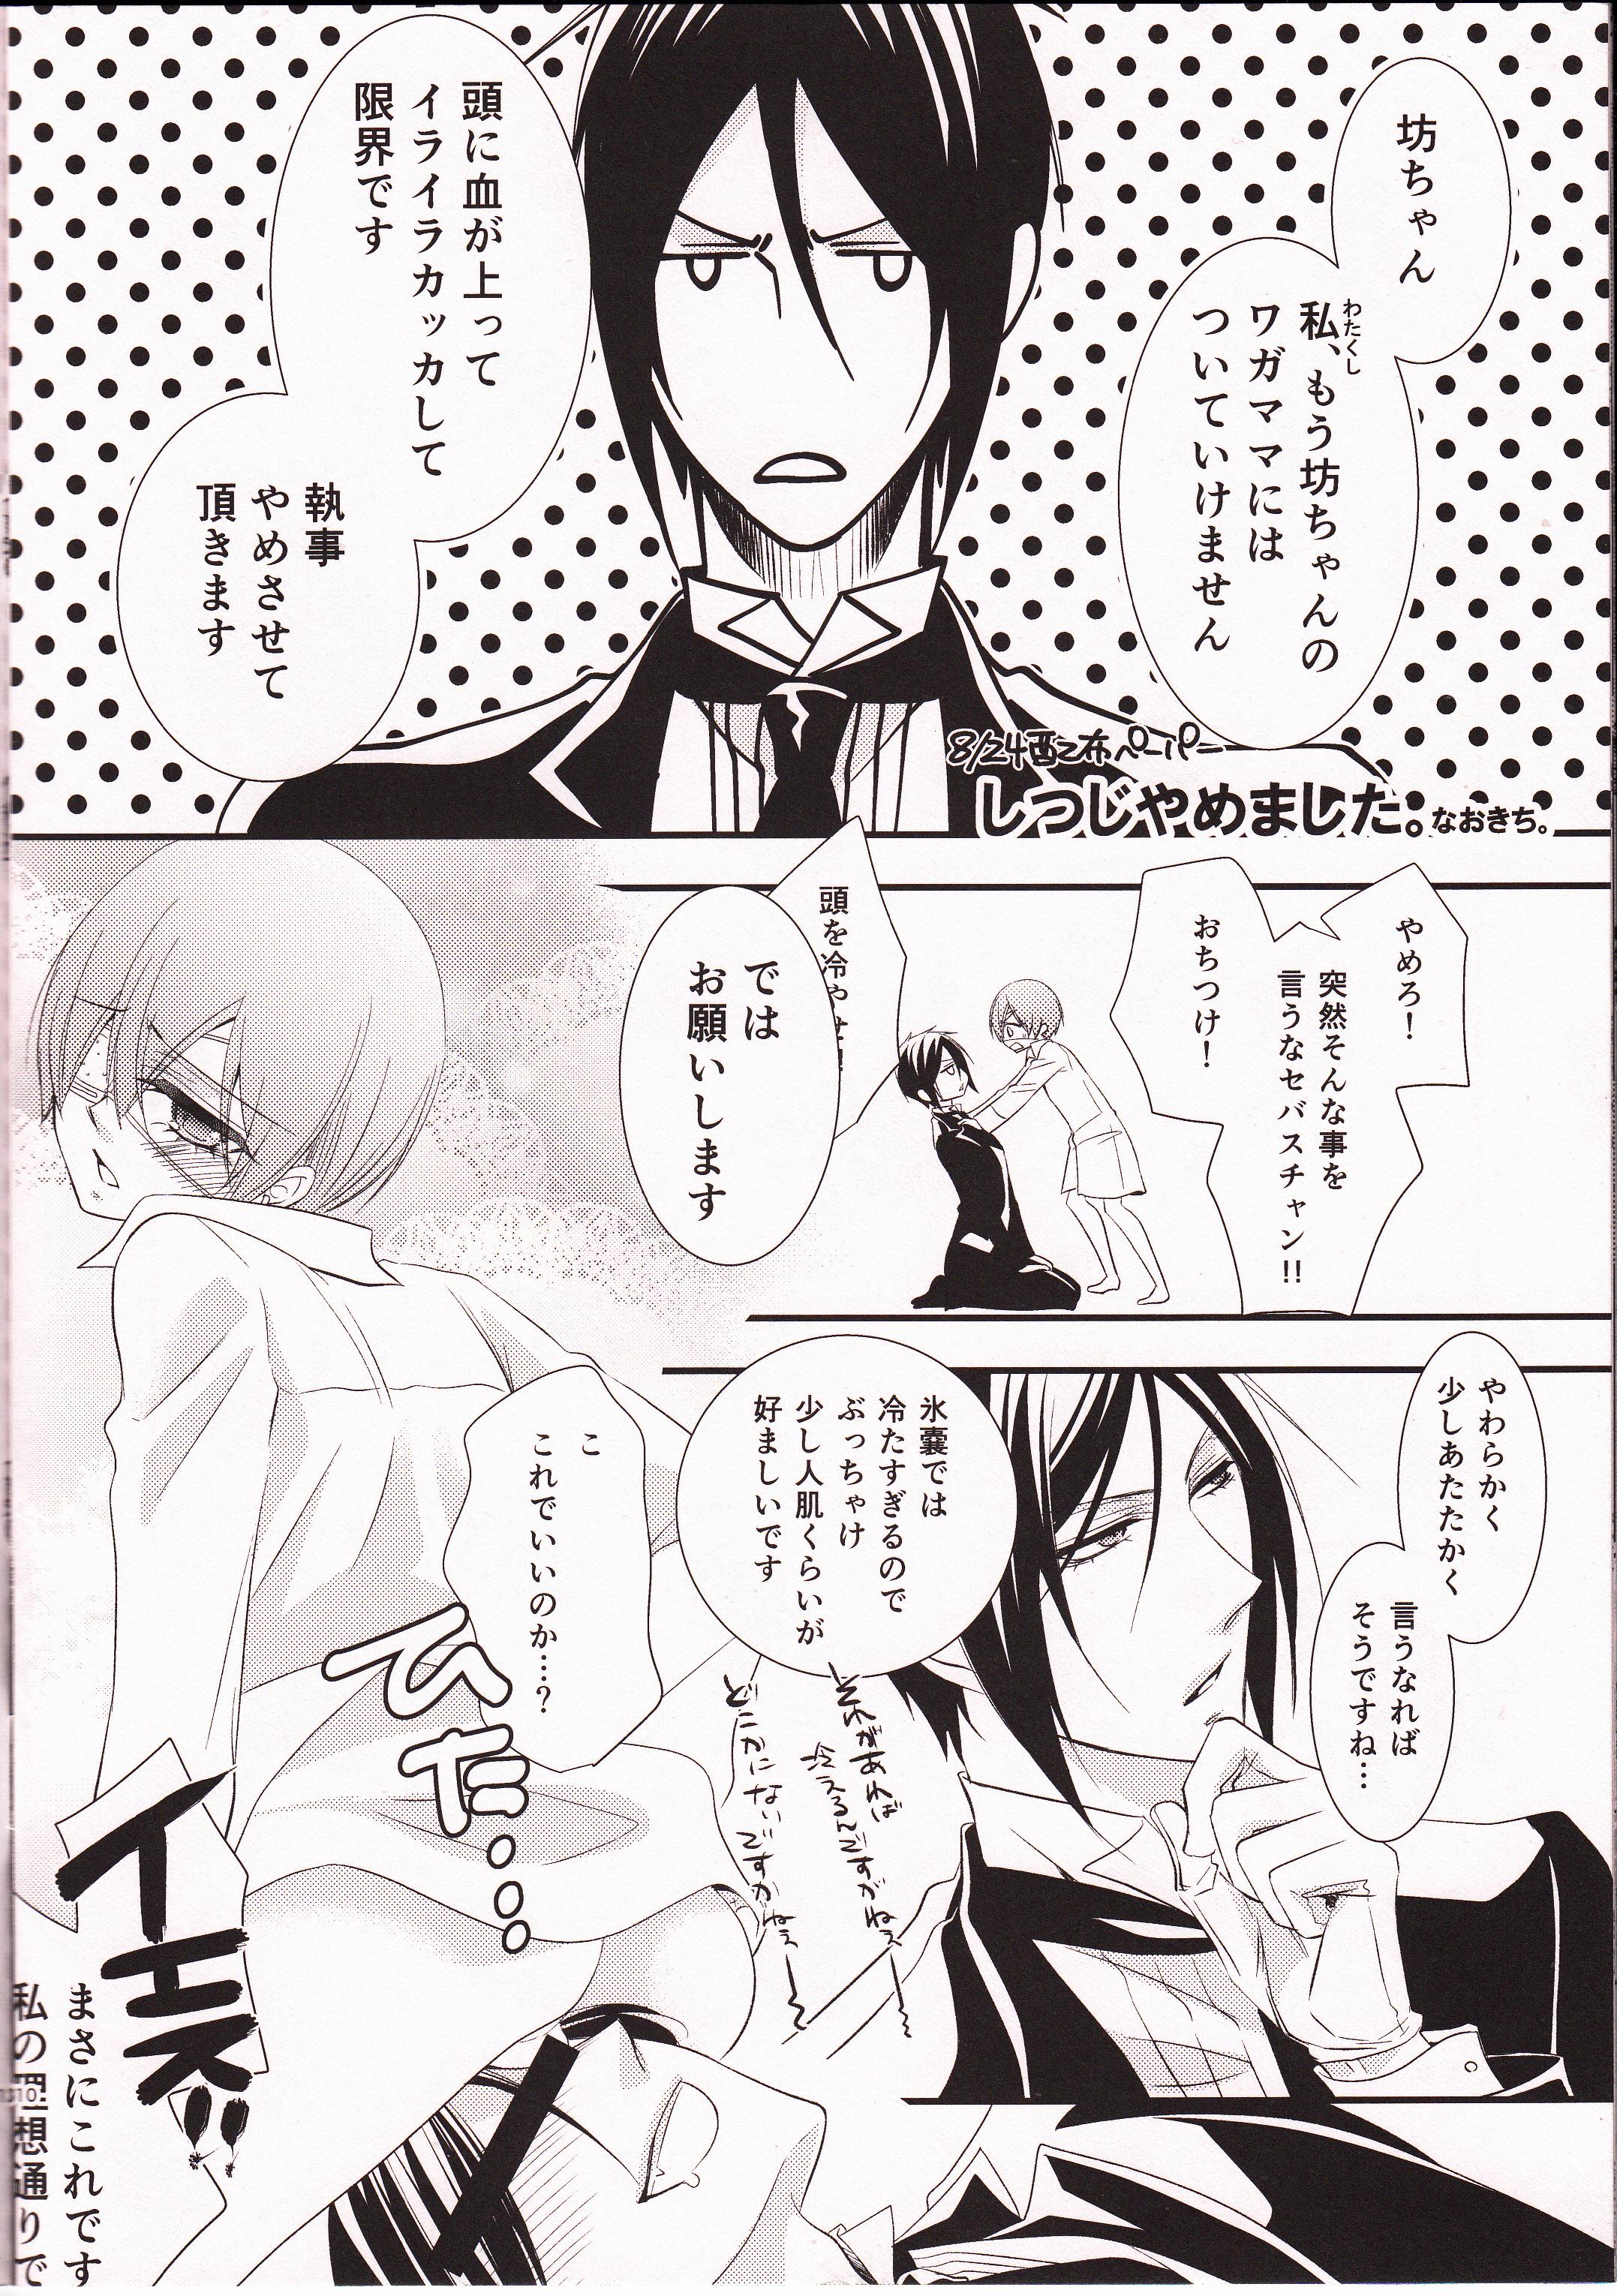 Tamil C - Black butler Leche - Page 10